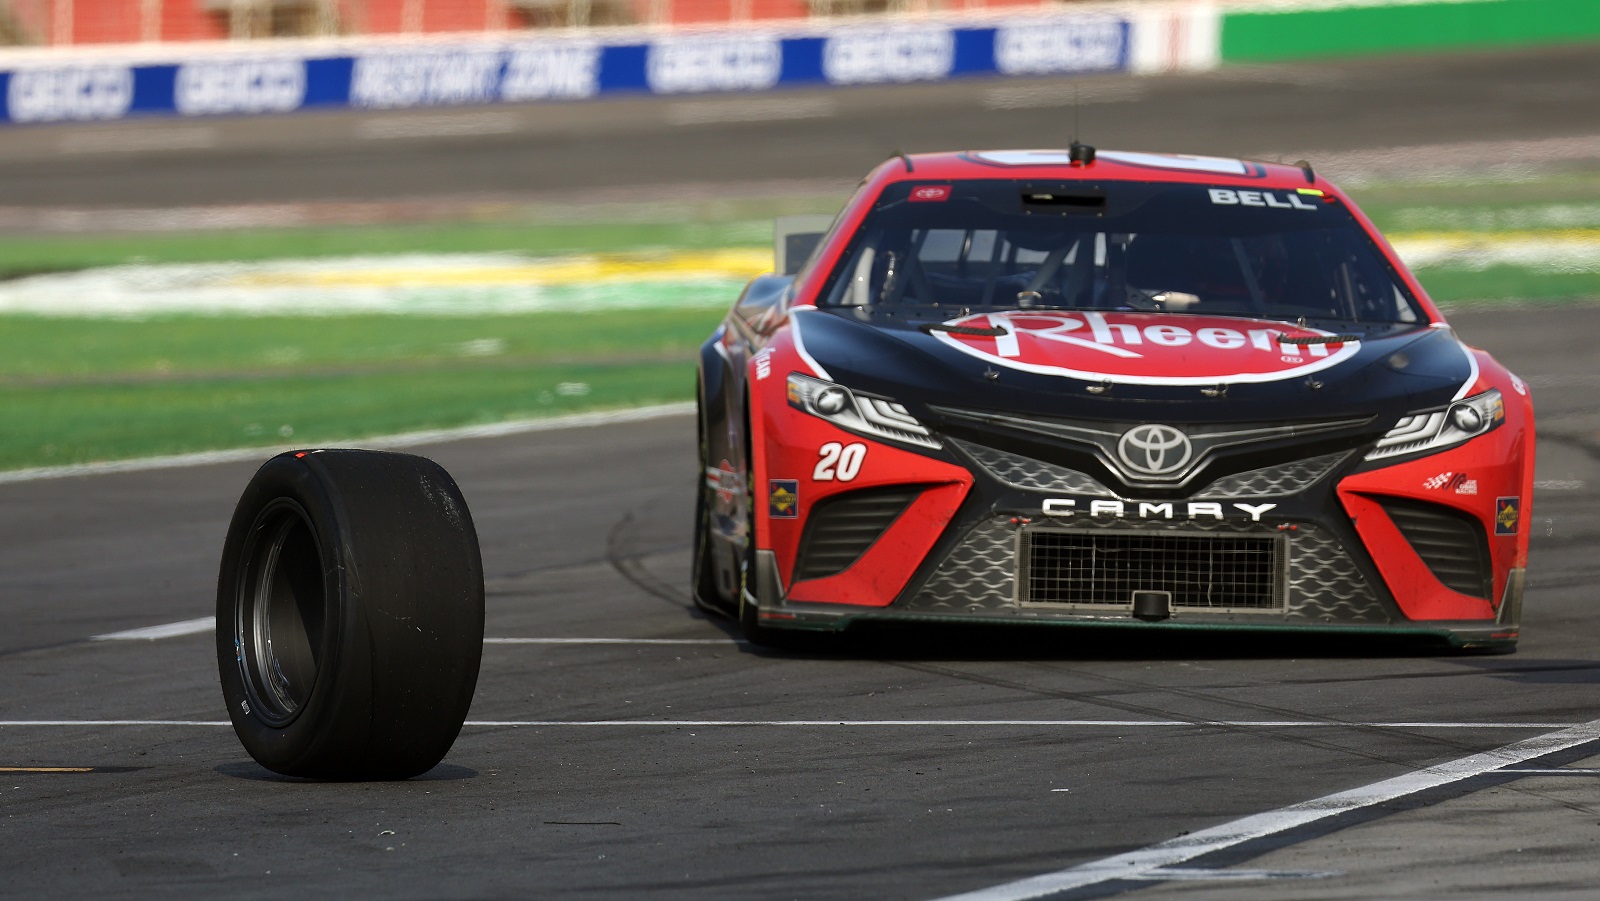 Christopher Bell loses a wheel from the No. 20 Toyota after a pit stop during the NASCAR Cup Series Quaker State 400 at Atlanta Motor Speedway on July 10, 2022. | James Gilbert/Getty Images